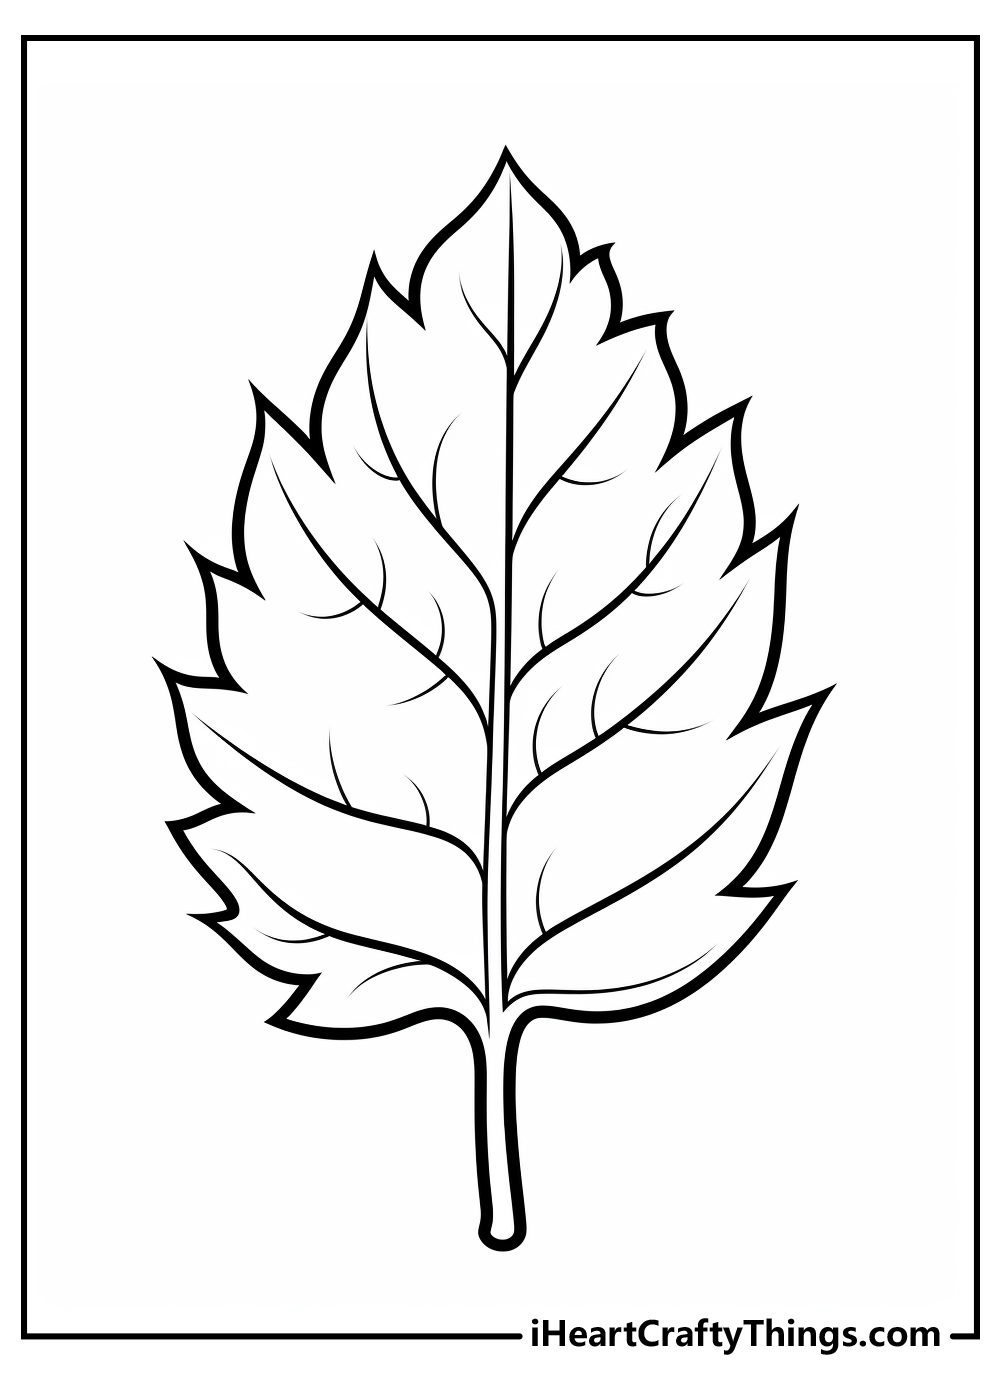 black-and-white coloring sheet free download